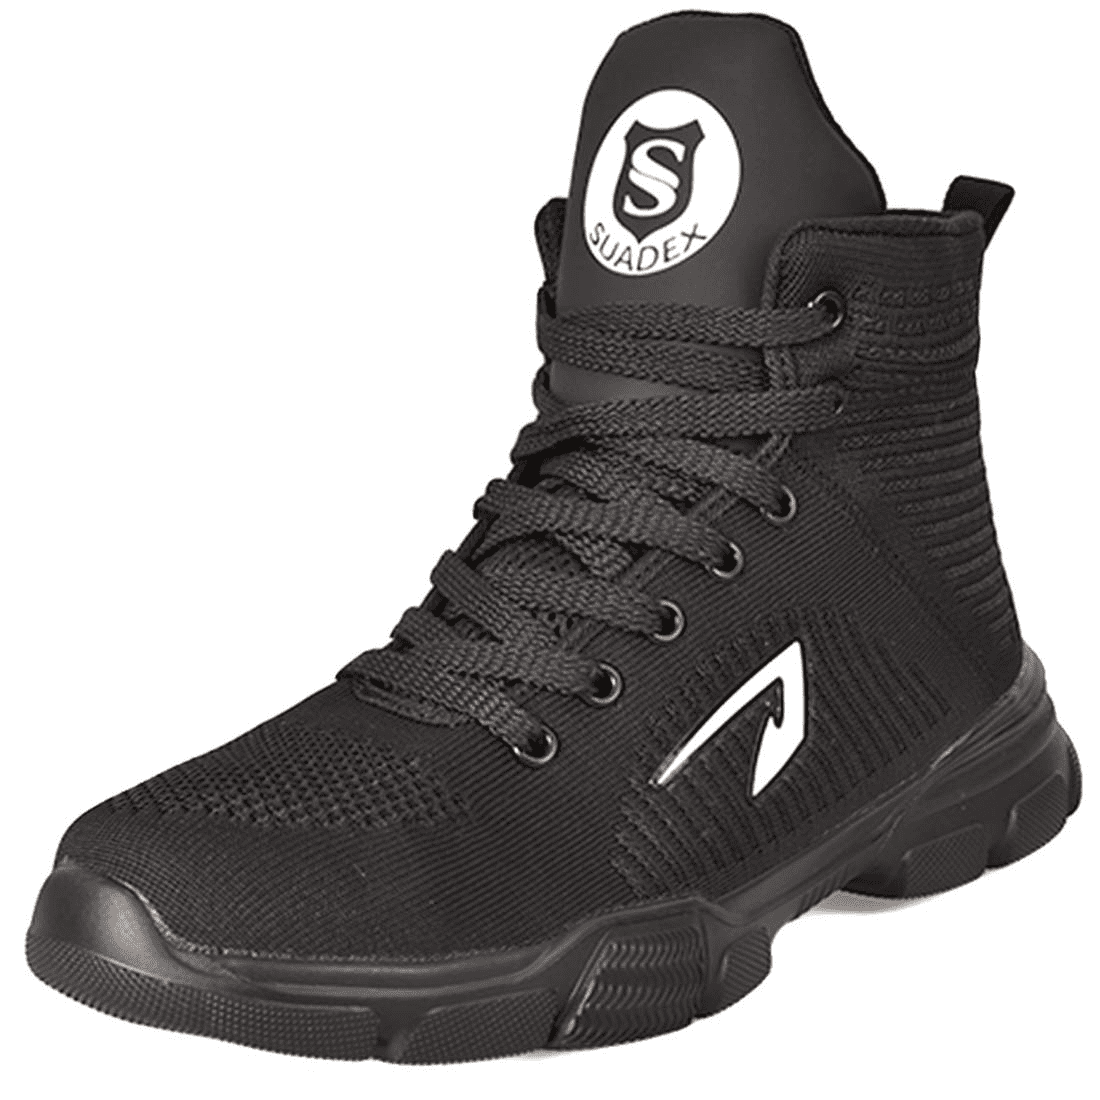 Men's Women's Safety Shoes Steel Toe Work Boots Indestructible High Top Trainers 